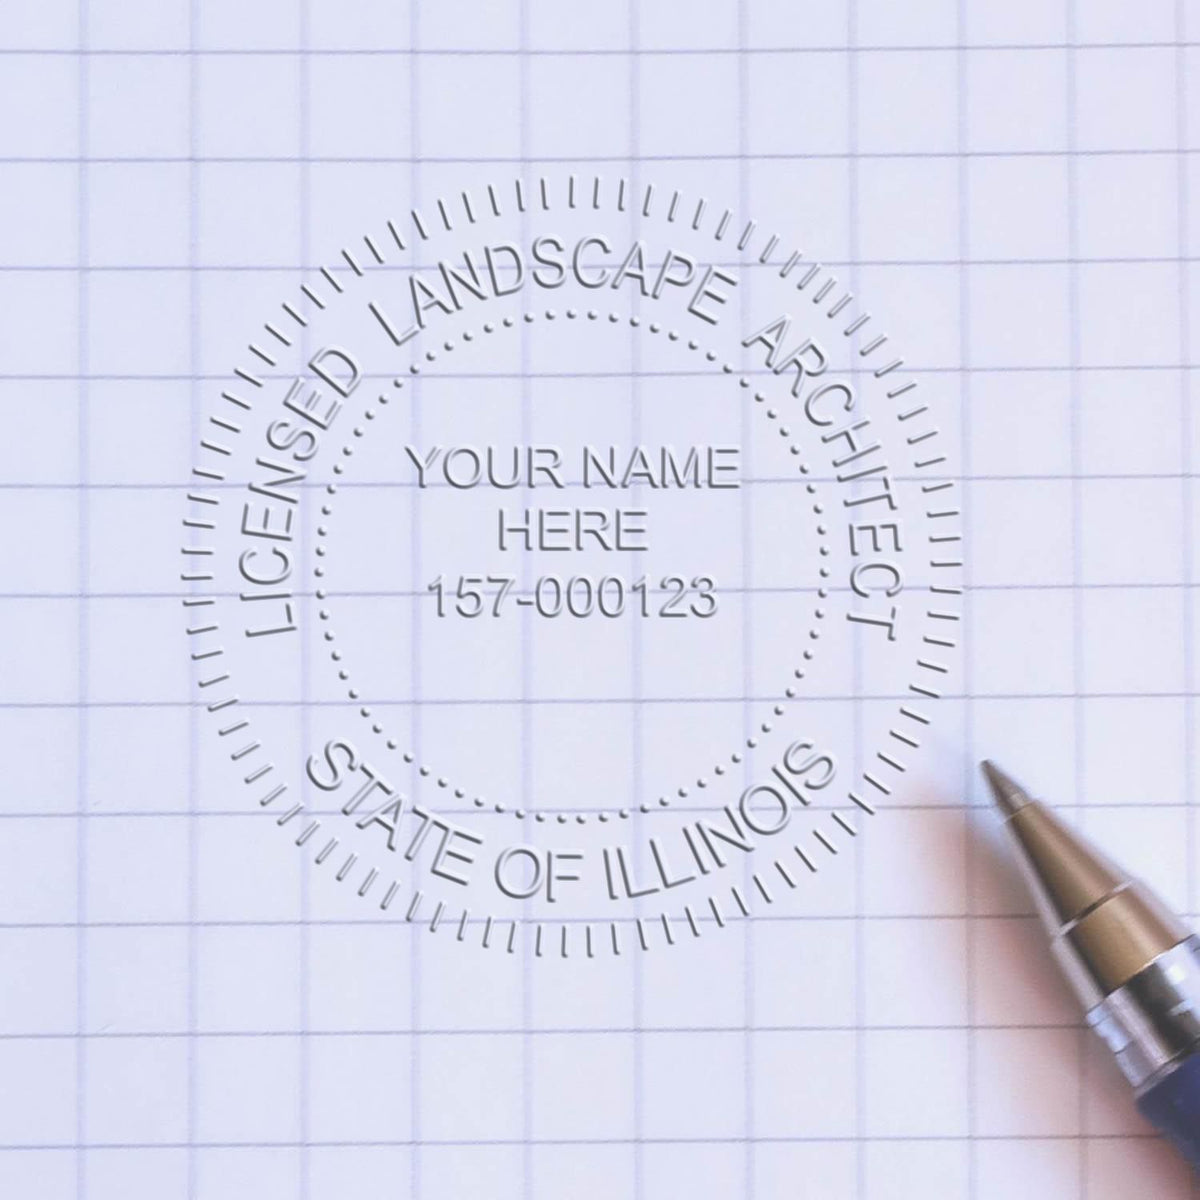 The Gift Illinois Landscape Architect Seal stamp impression comes to life with a crisp, detailed image stamped on paper - showcasing true professional quality.